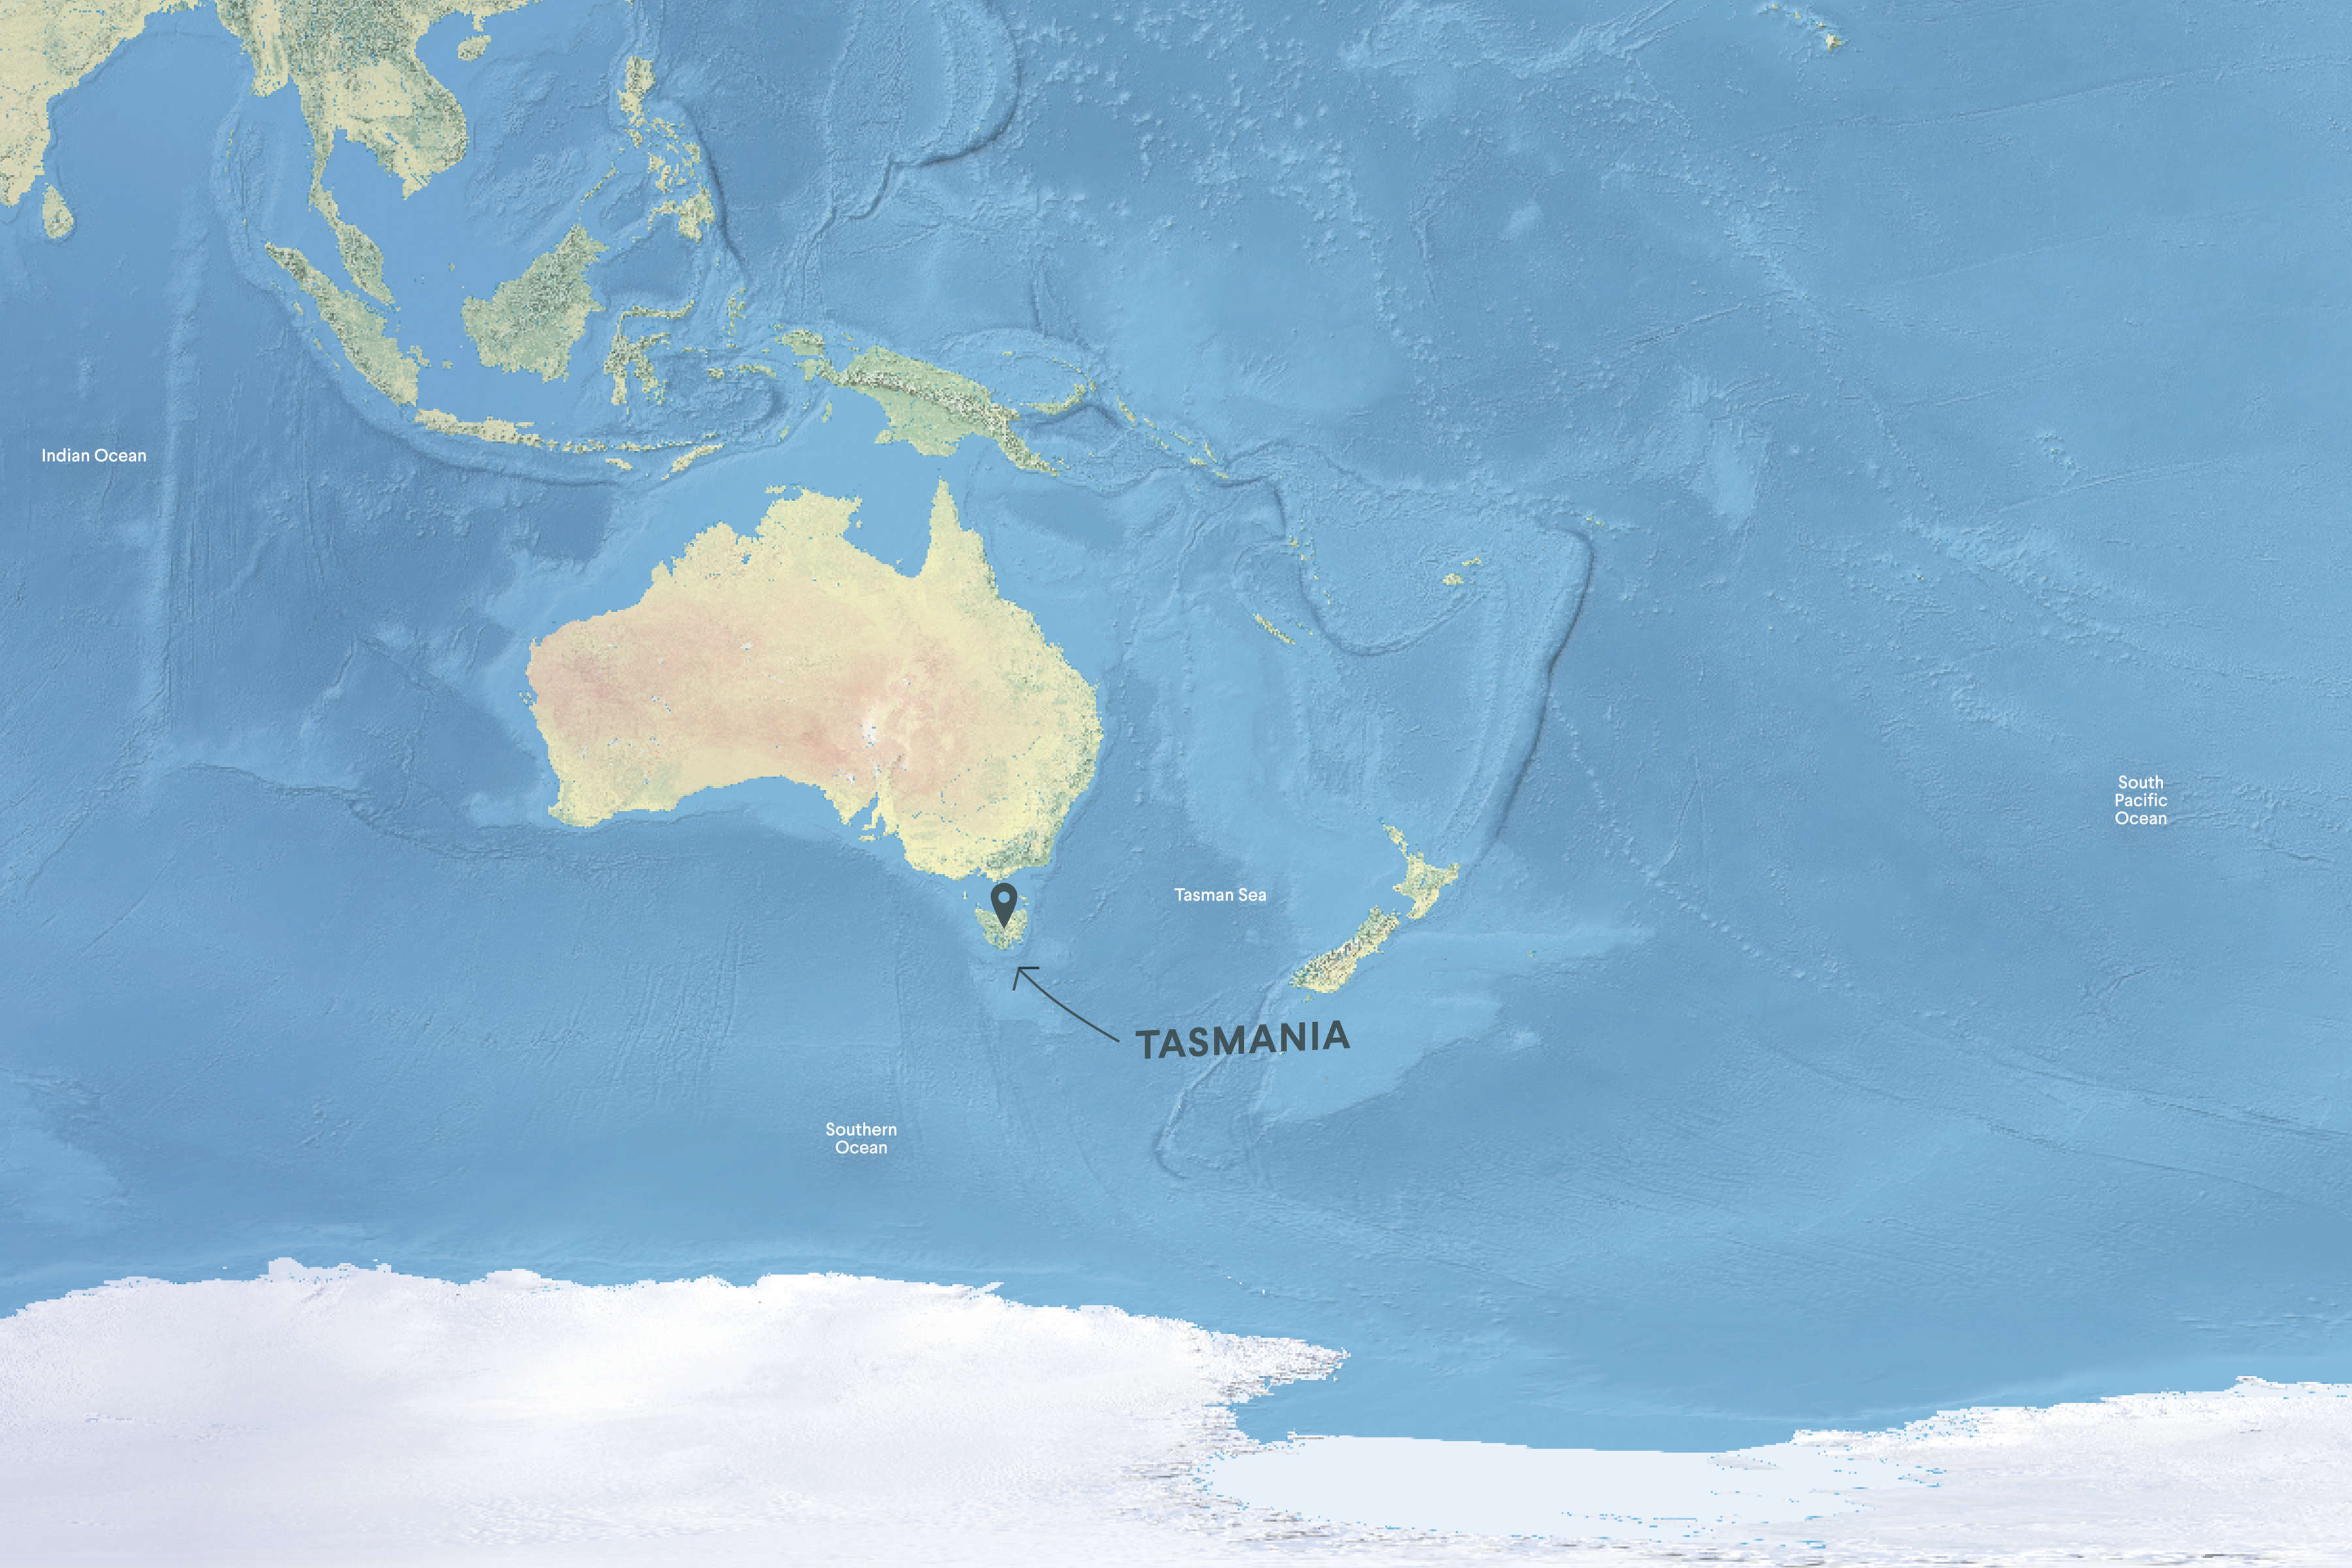 World map showing the location of Tasmania relative to the Australian mailand and the Indian Ocean, Southern Ocean, Tasman Sea, South Pacific Ocean and South-East Asia and New Zealand.